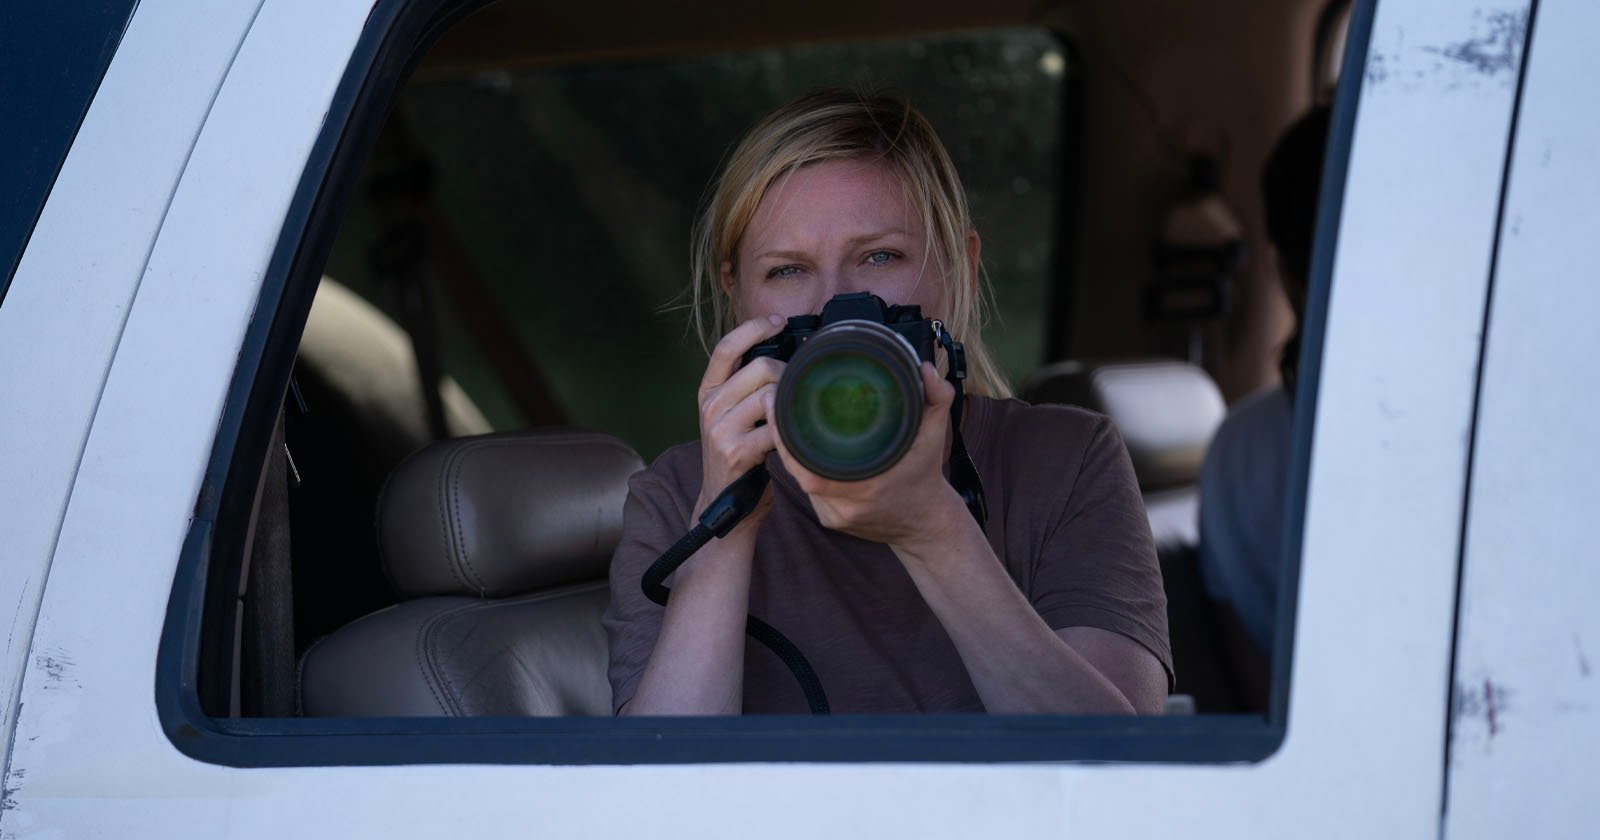 A woman with blonde hair sits in a vehicle's driver seat, looking through the viewfinder of a dslr camera aimed out the window. The vehicle's interior is visible.